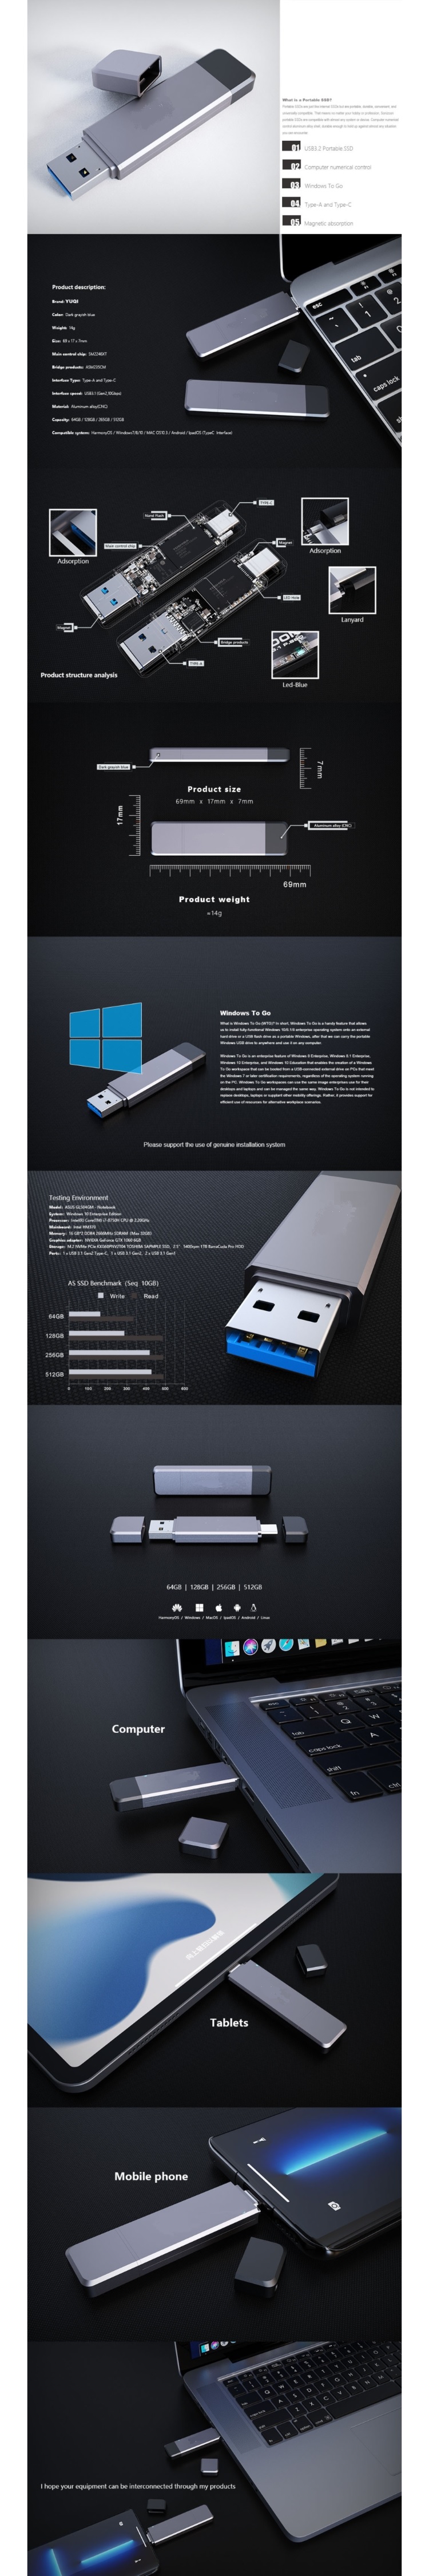 SSD OTG Type C 3.1 3.2 Solid State 500Mbs 128GB 256GB 512GB 1TB Solid State USB Flash Drive SSD OTG Type C 3.1 3.2 Solid State 500Mbs 512GB 1TB Solid State USB Flash Drive solid state usb stick，ssd flash drive,ssd usb drive,flash storage solid state